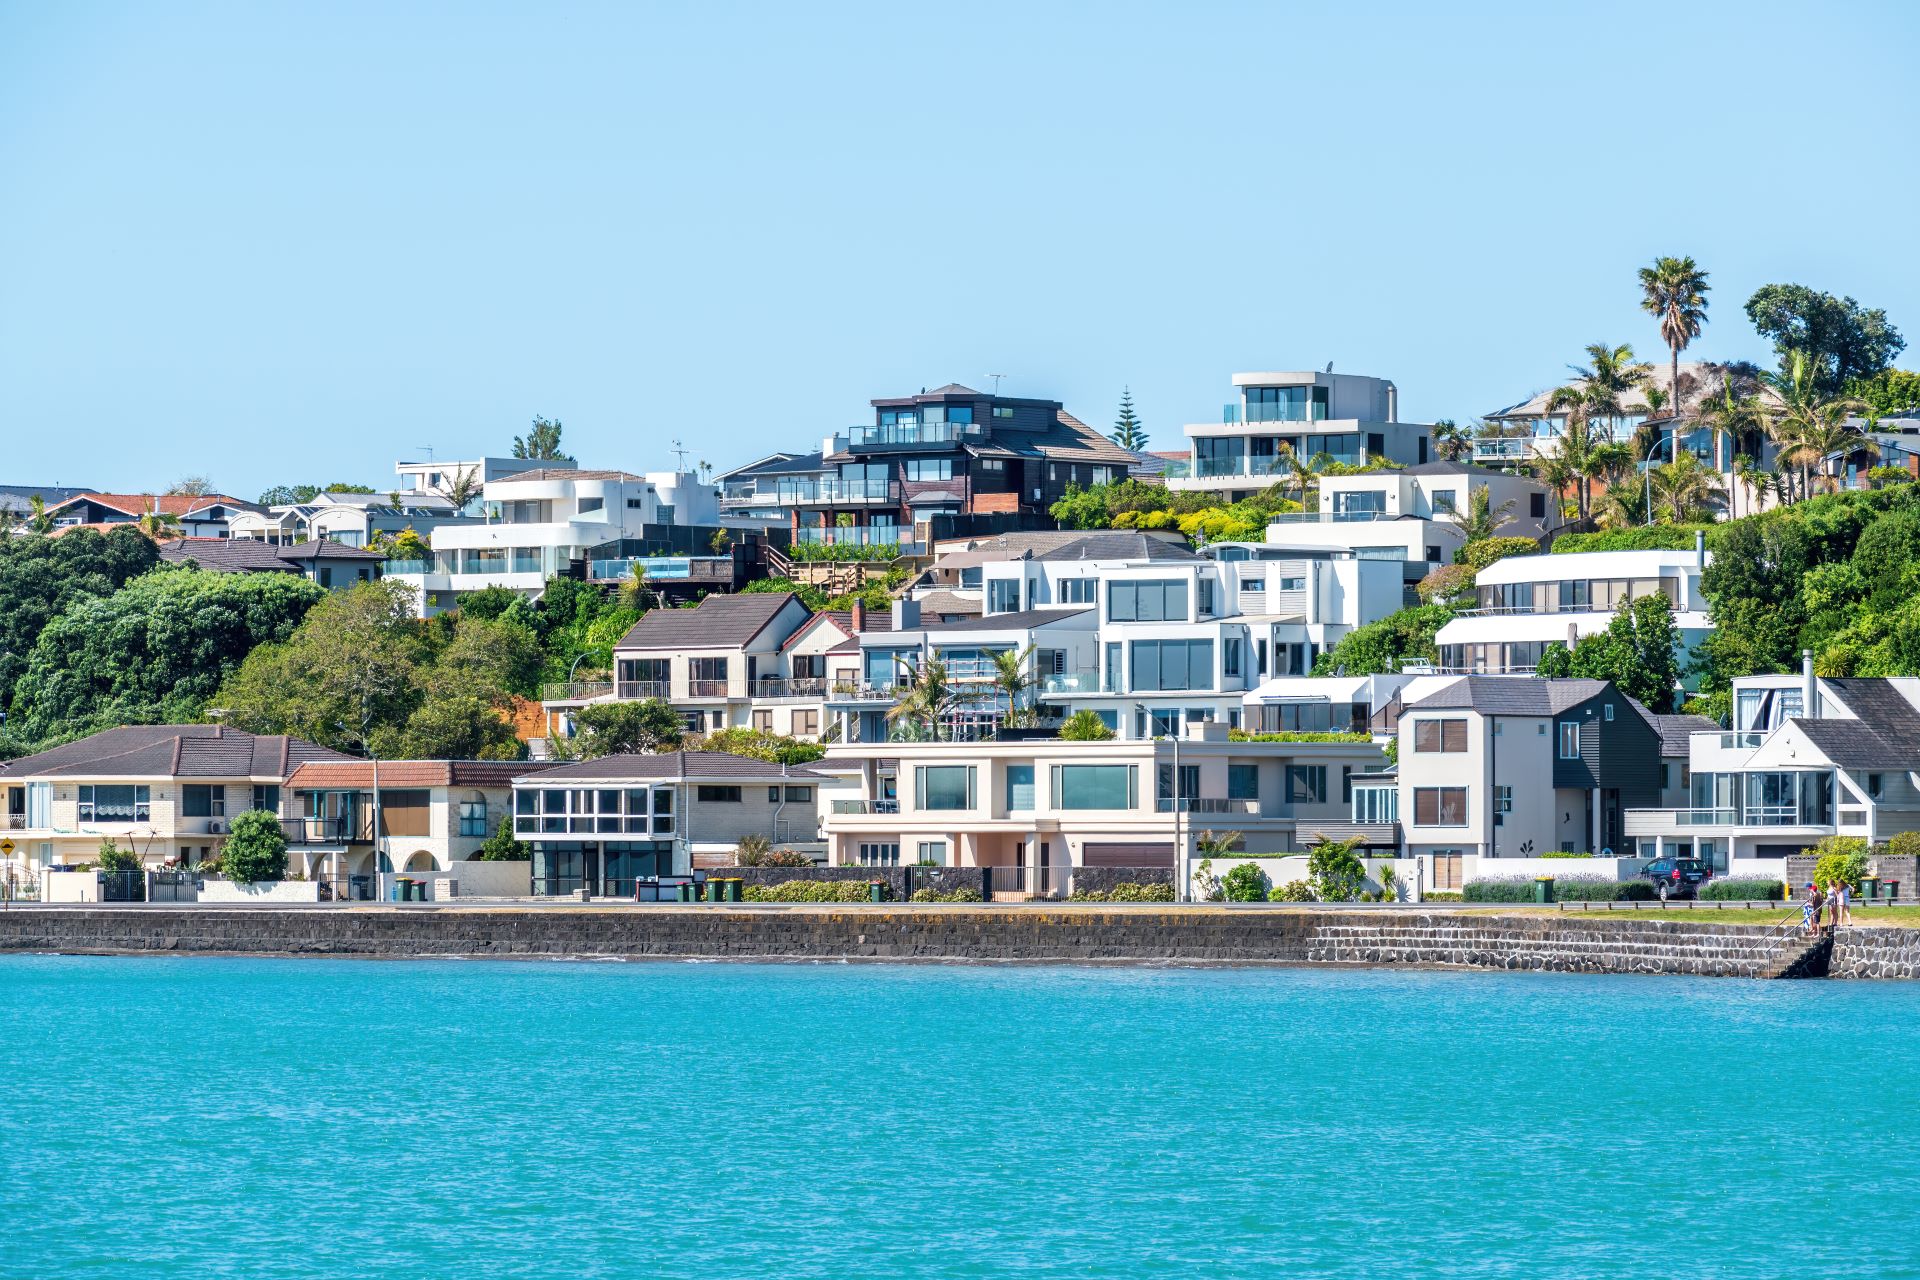 Residential homes beside the sea